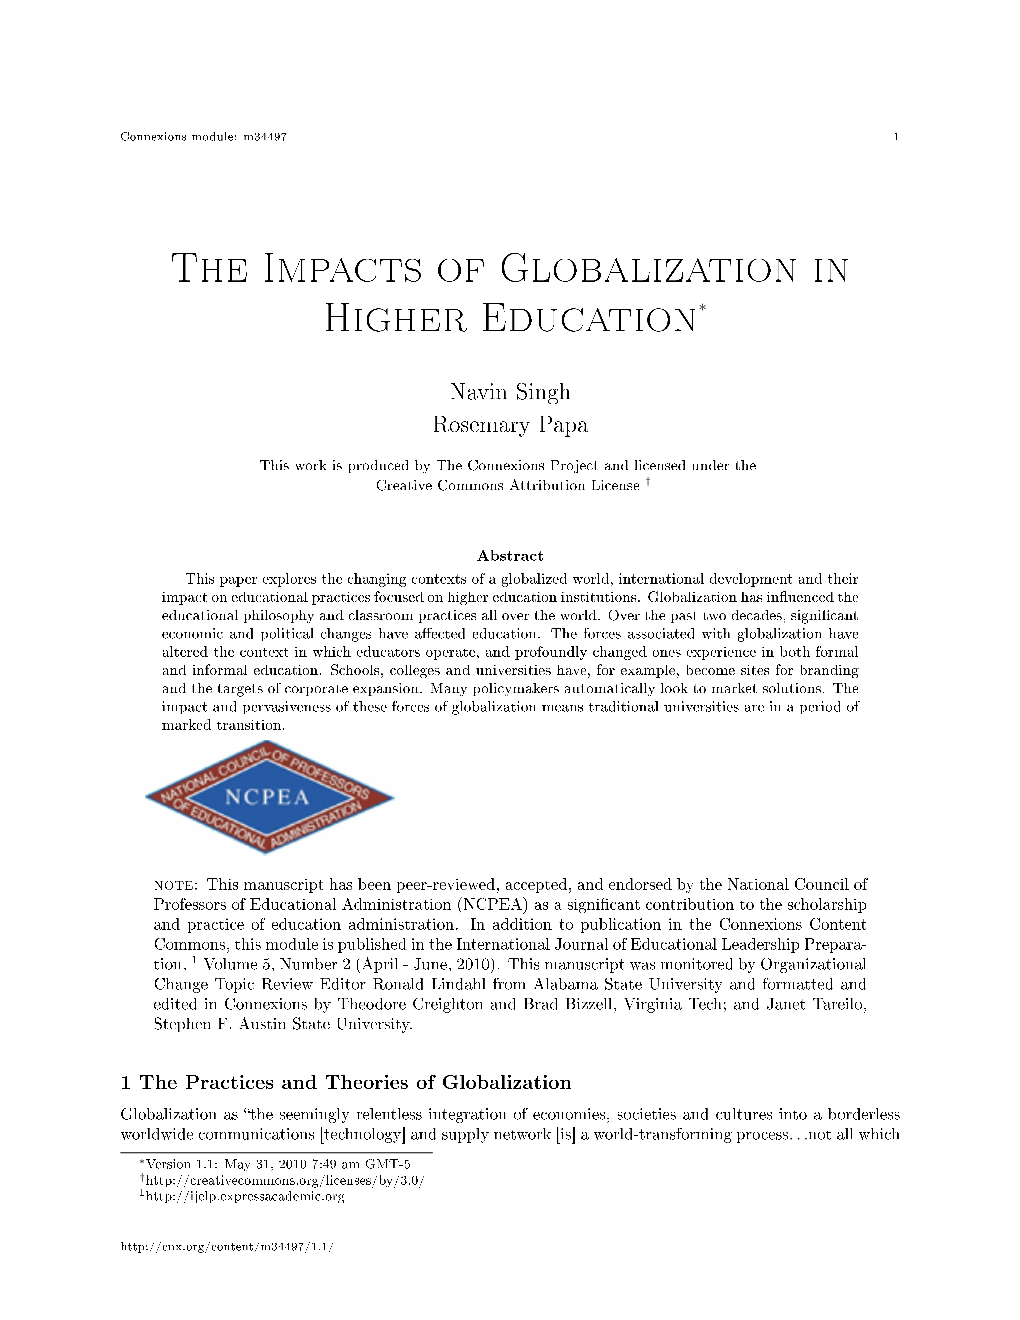 The Impacts of Globalization in Higher Education∗